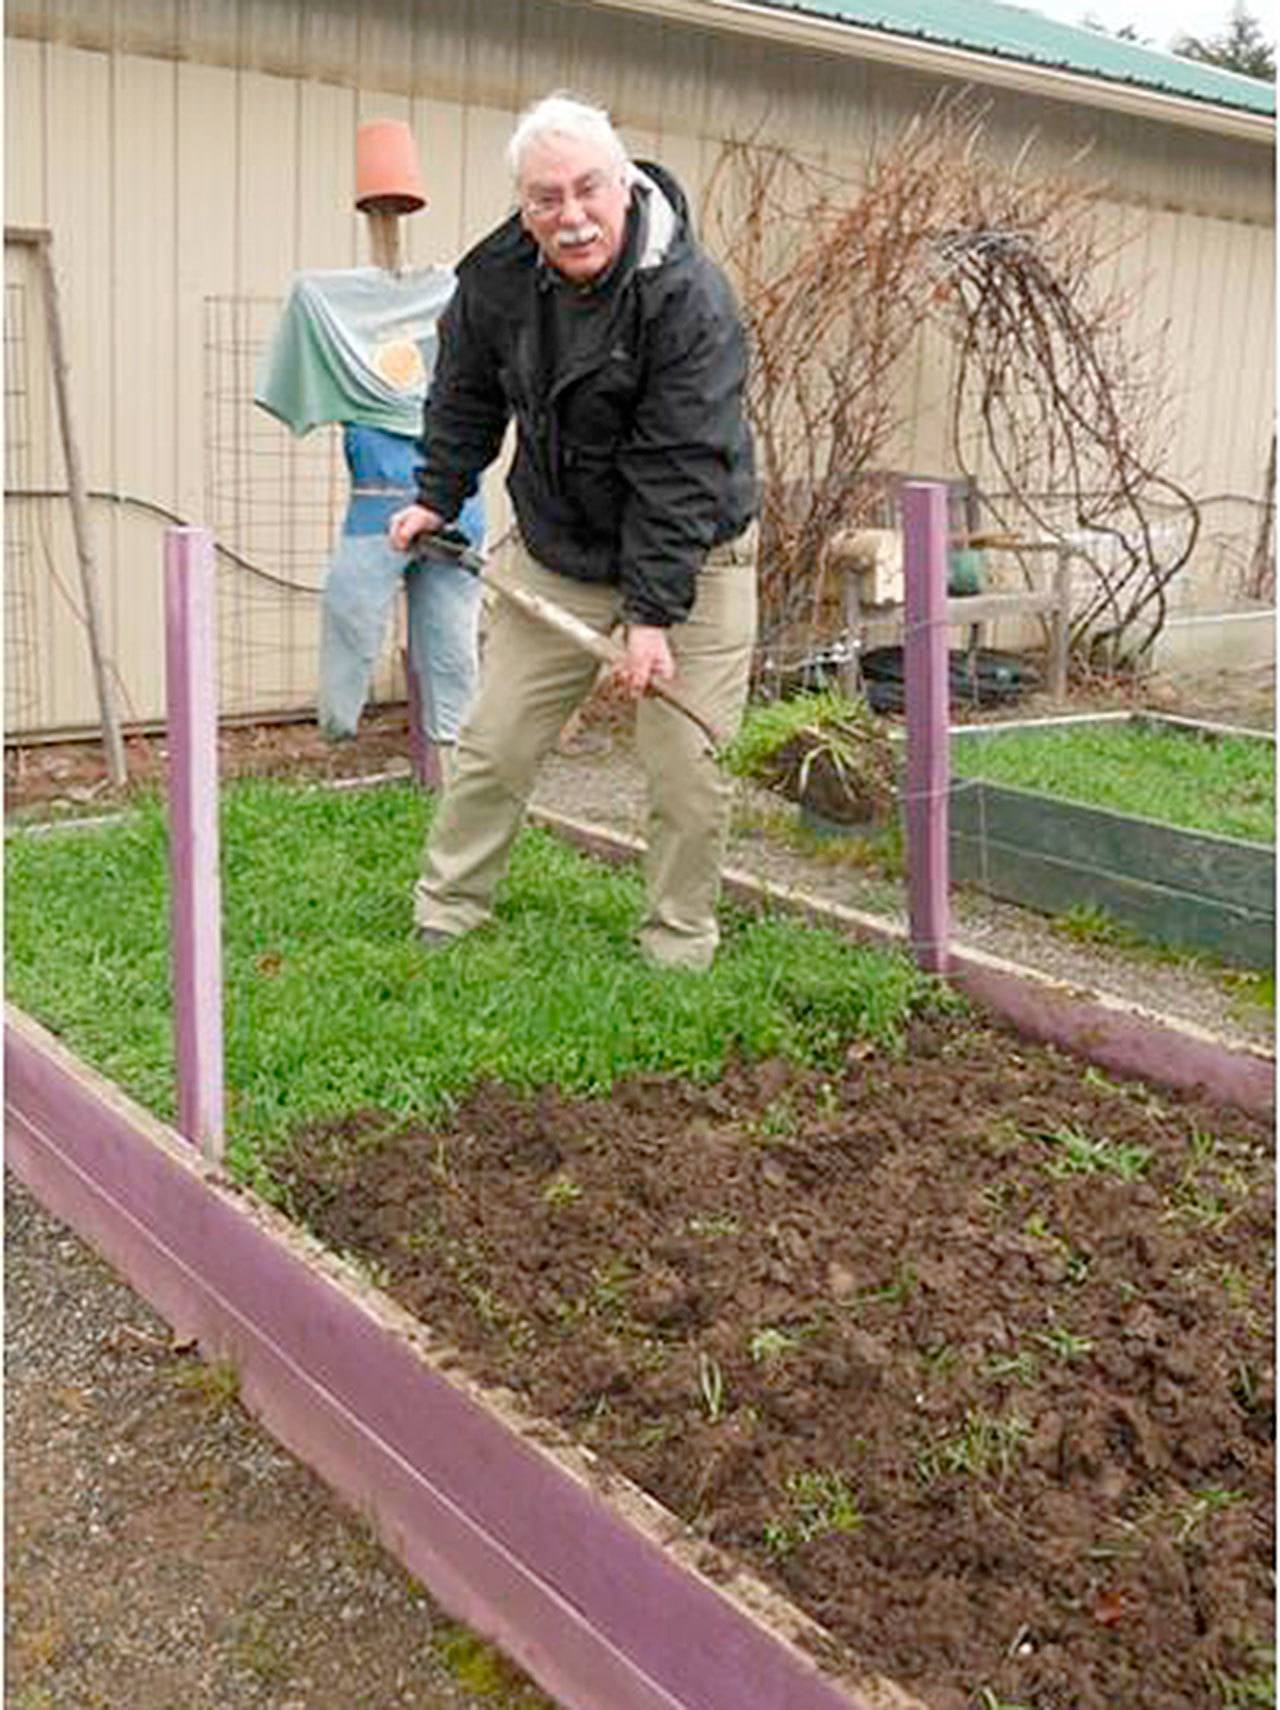 Information on using cover crops in home gardens will be presented by Master Gardener Bob Cain at noon Thursday at the County Commissioners Meeting Room of the Clallam County Courthouse, 223 E. Fourth St., Port Angeles.